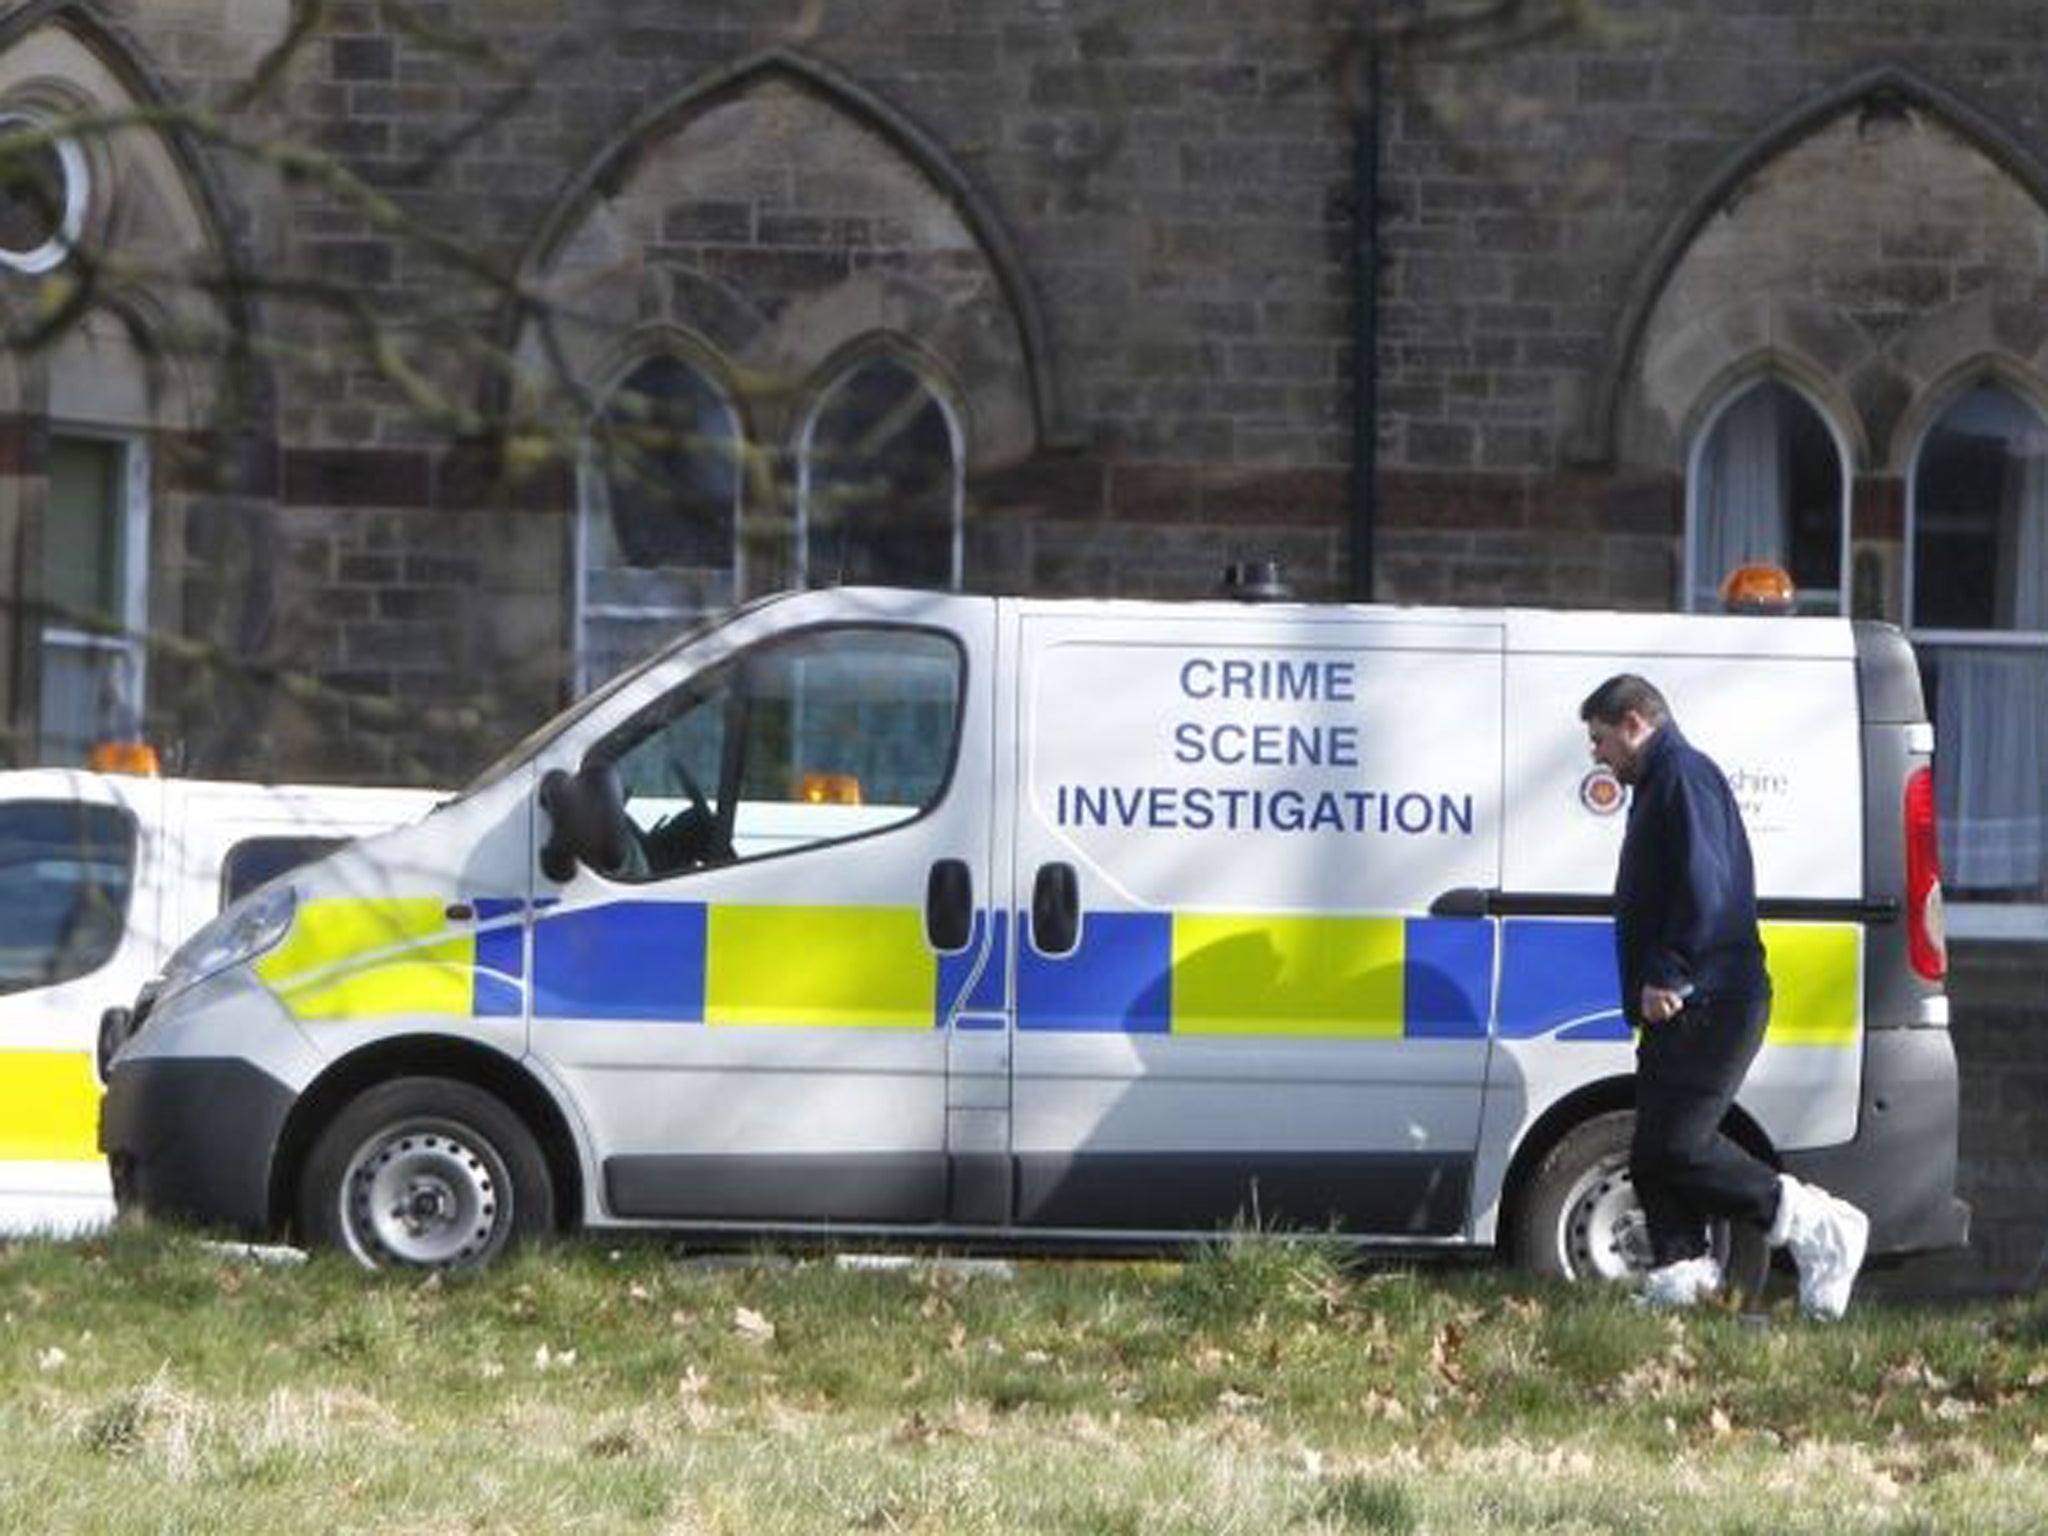 A view of CSI vans at the Jamea Al Kauthar school in Lancaster, following the arrests of three men over claims of sexual assault and false imprisonment